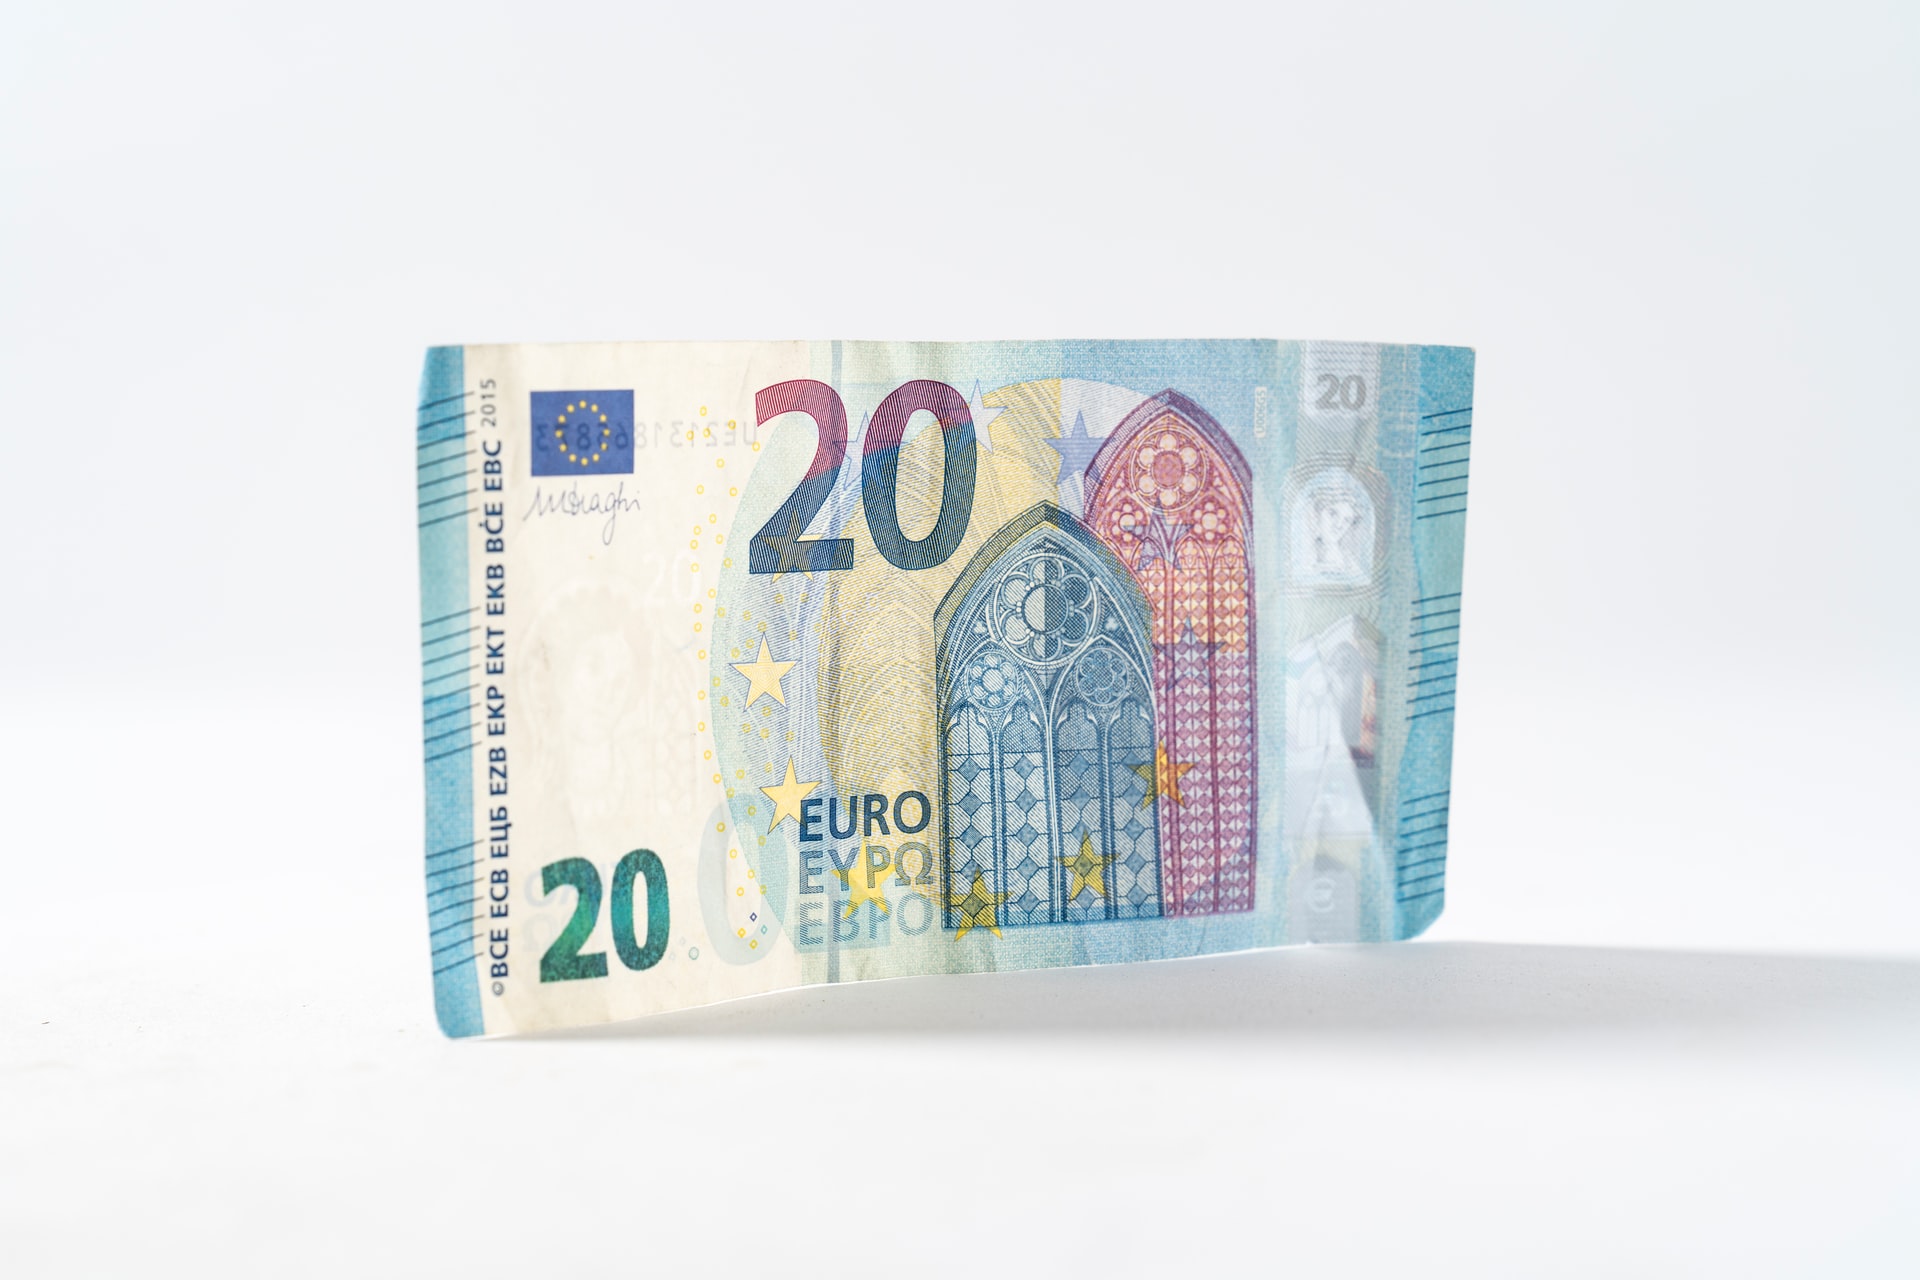 A blue bill of 20 euro on a white background.